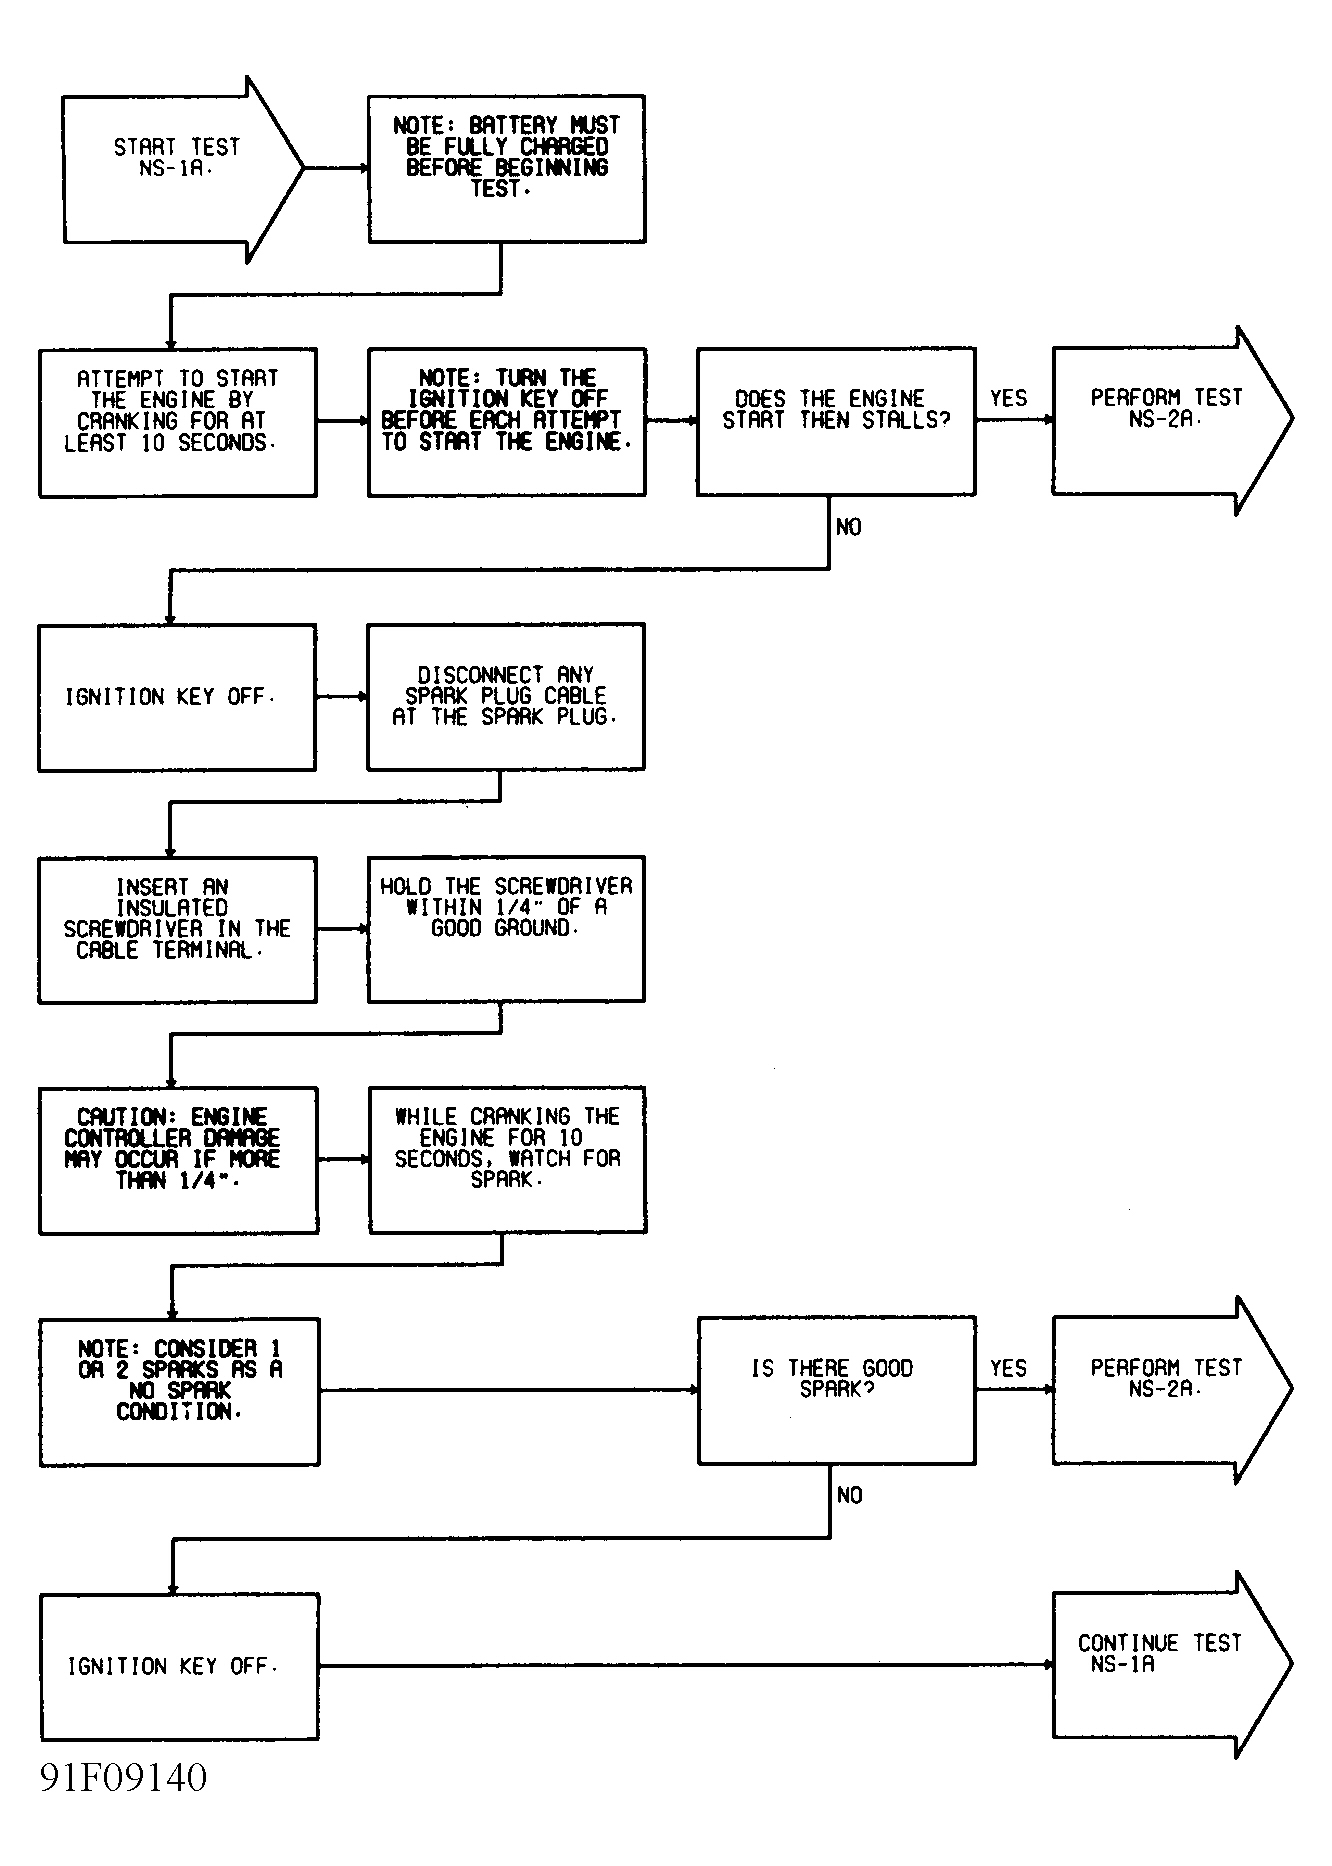 Chrysler New Yorker Salon 1991 - Component Locations -  Test NS-1A: Flowchart (1 of 4)